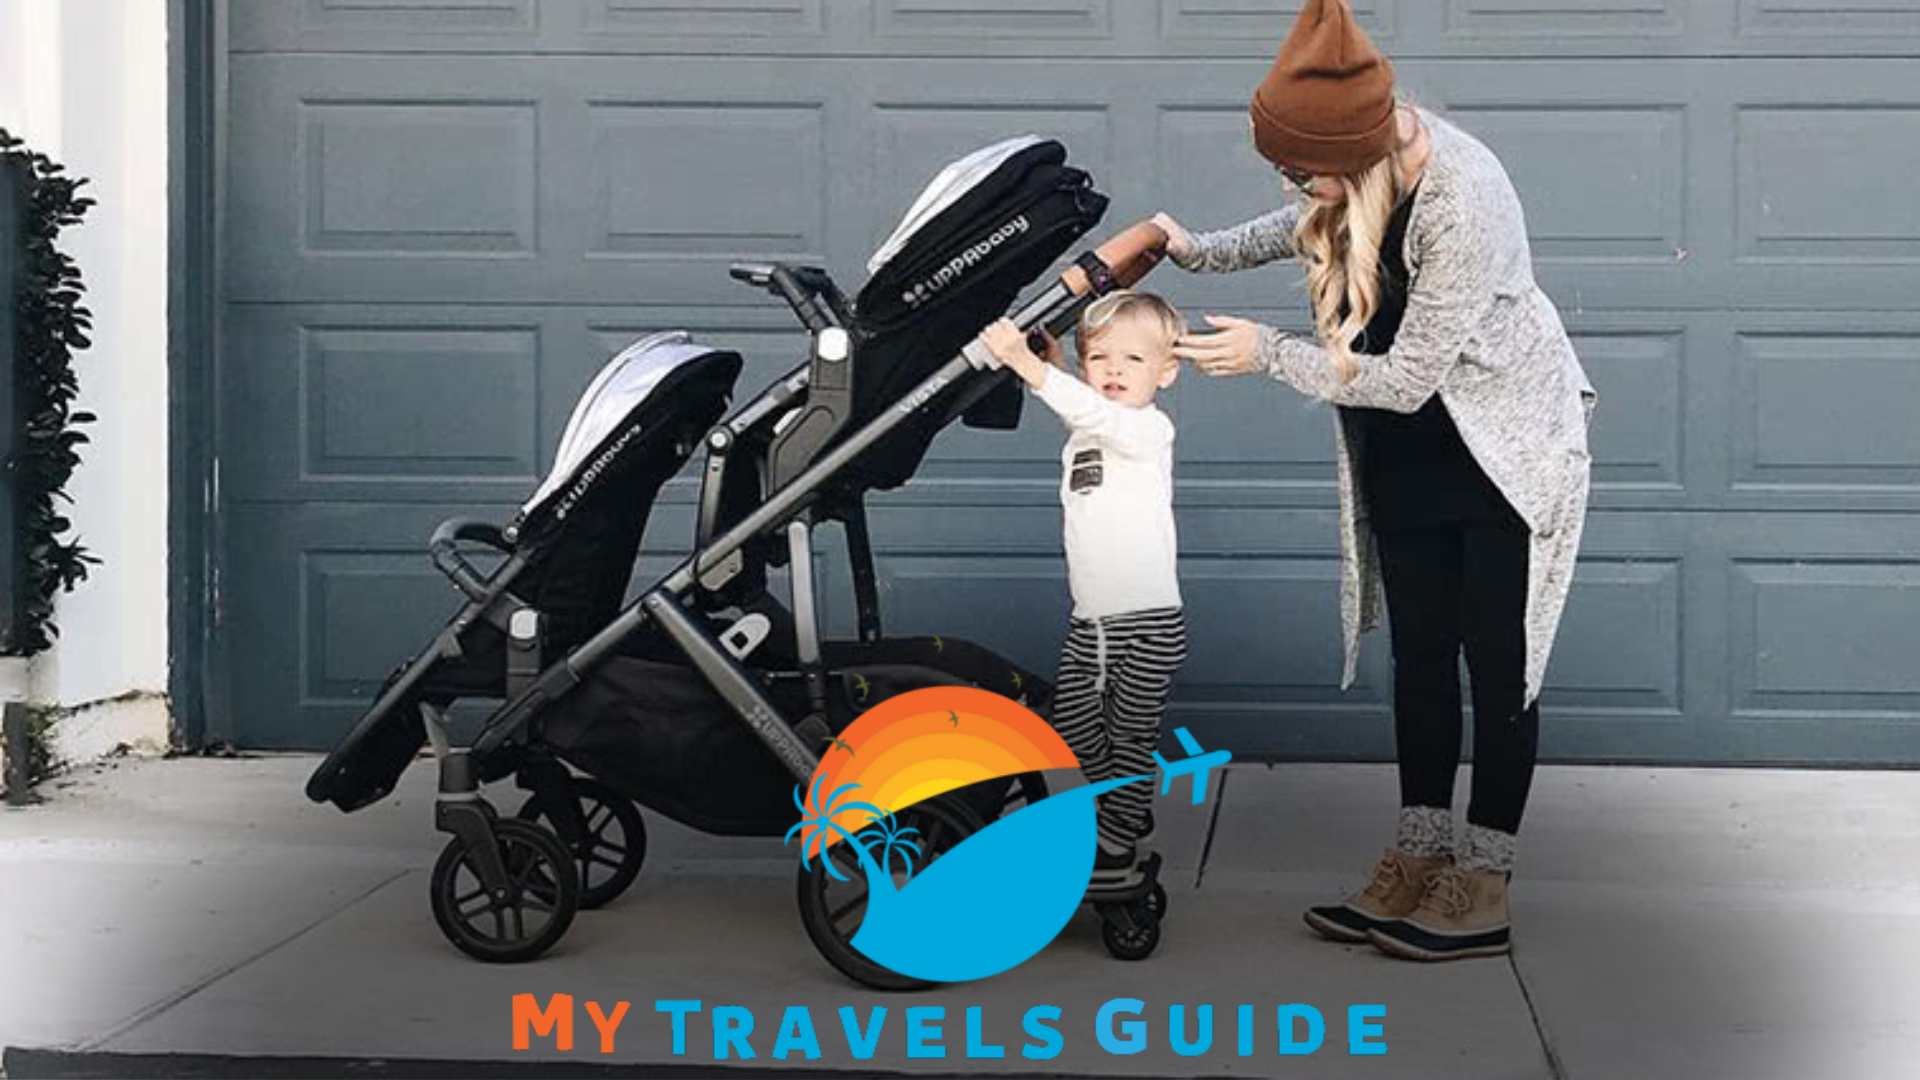 Will a Chicco Car Seat Fit in a Baby Trend Jogging Stroller?